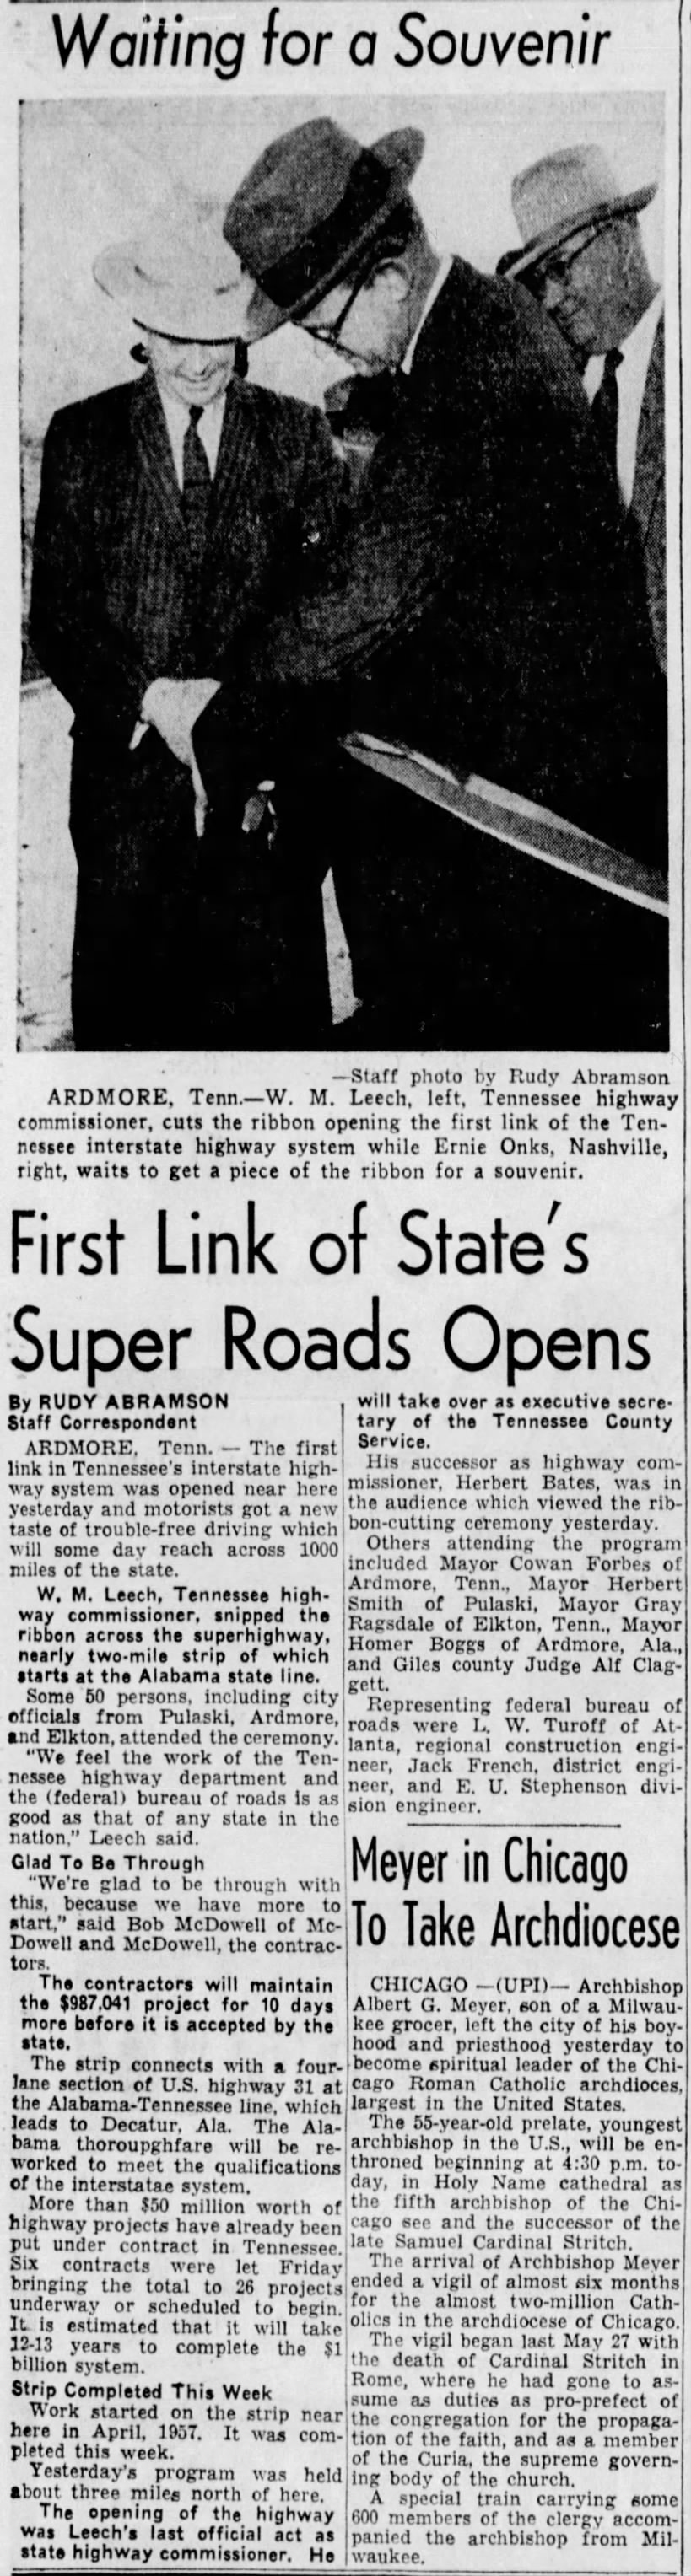 First Link of State's Super Roads Opens